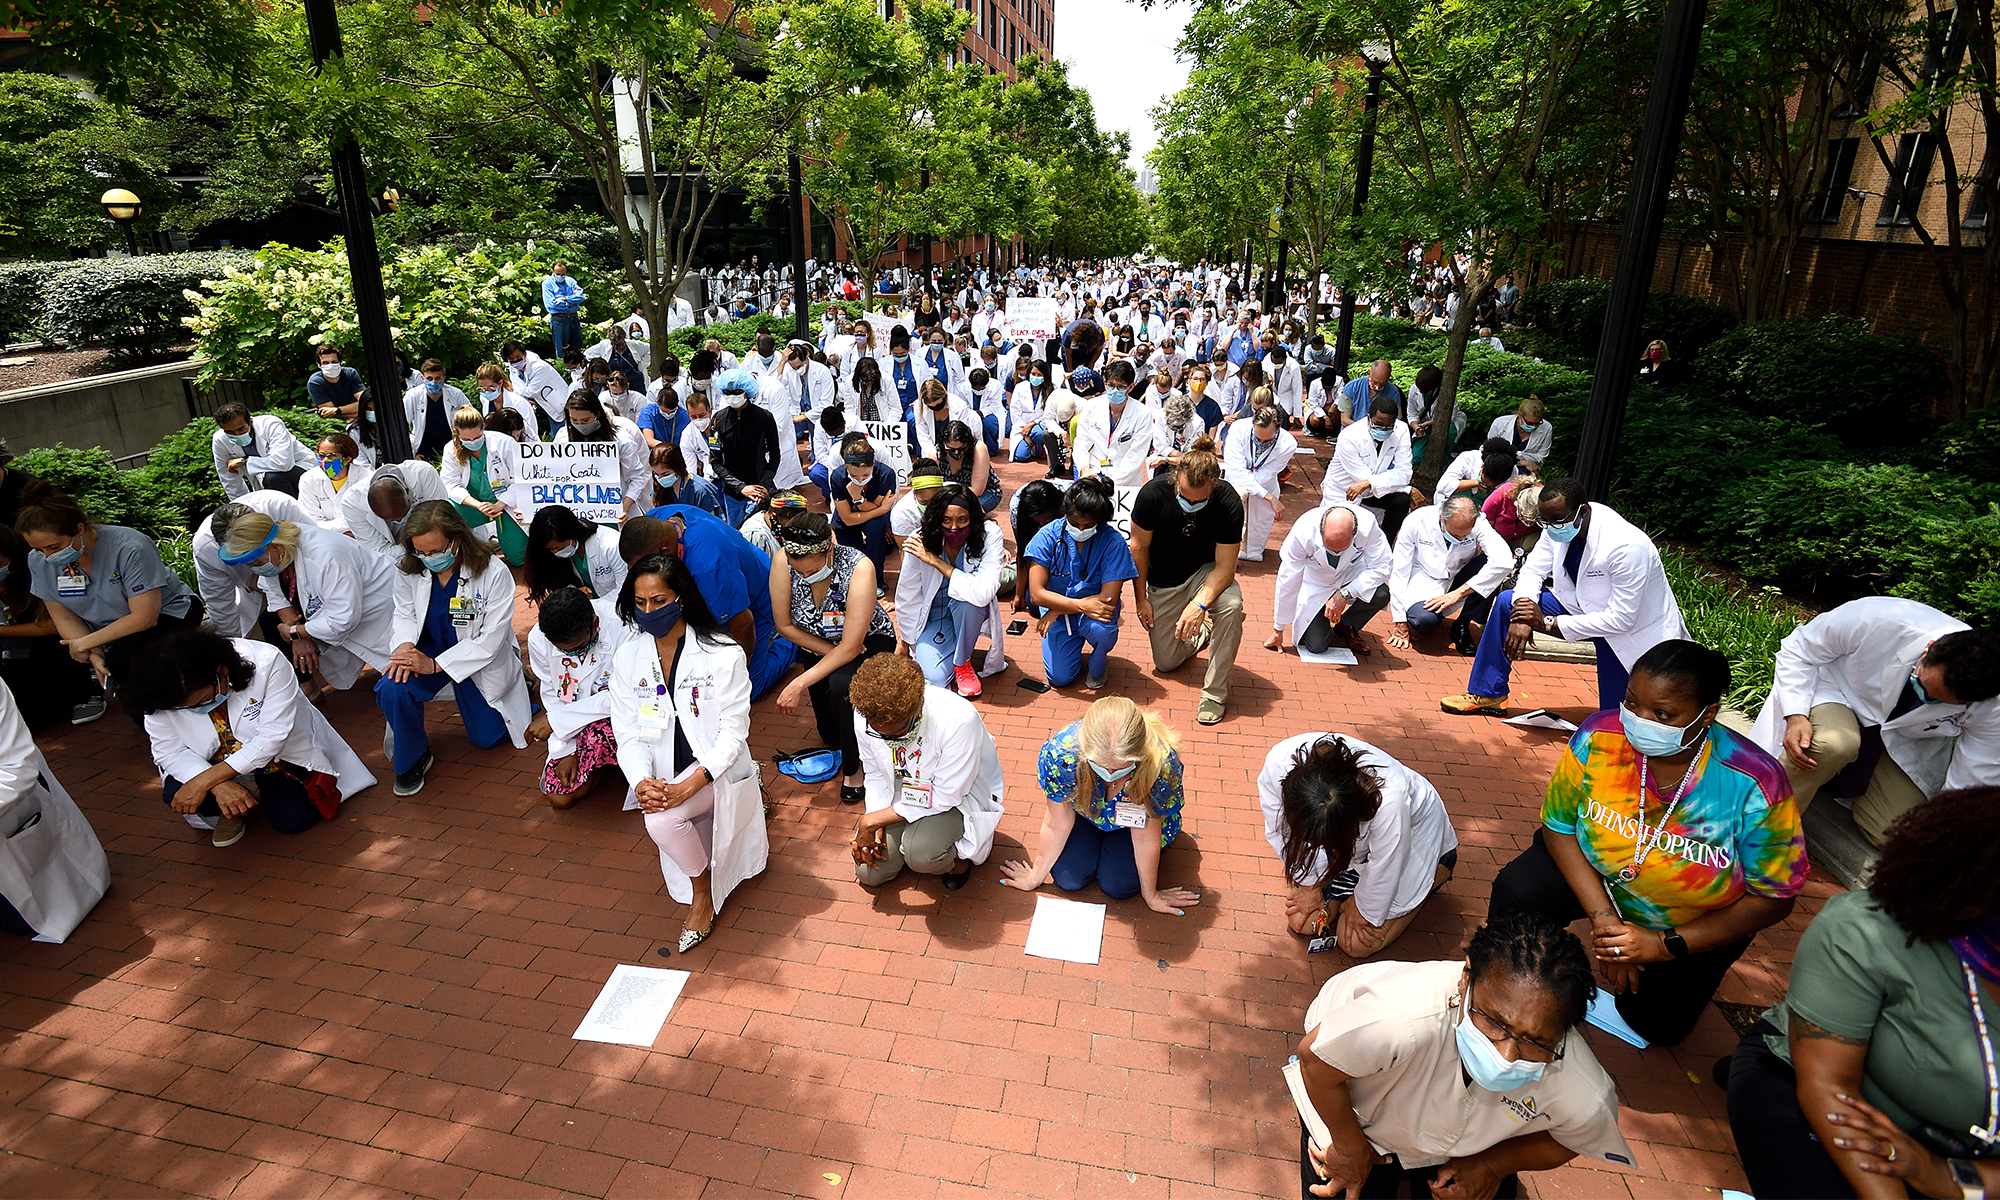 Hundreds of Johns Hopkins clinicians in white lab coats kneel on the campus of the Johns Hopkins hospital.